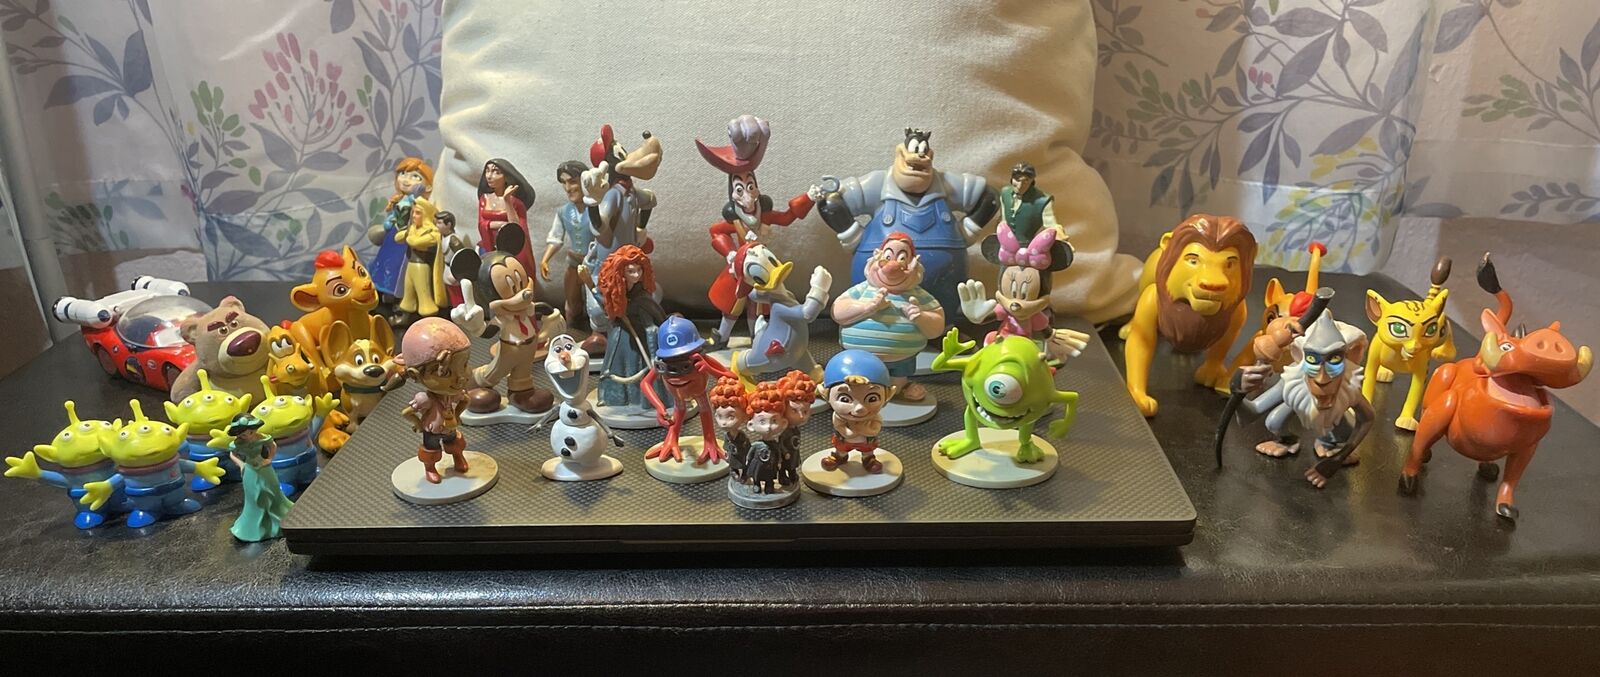 Disney Pixar Mixed Lot of 36 PVC Plastic Cake Toppers And Assorted Small Figures